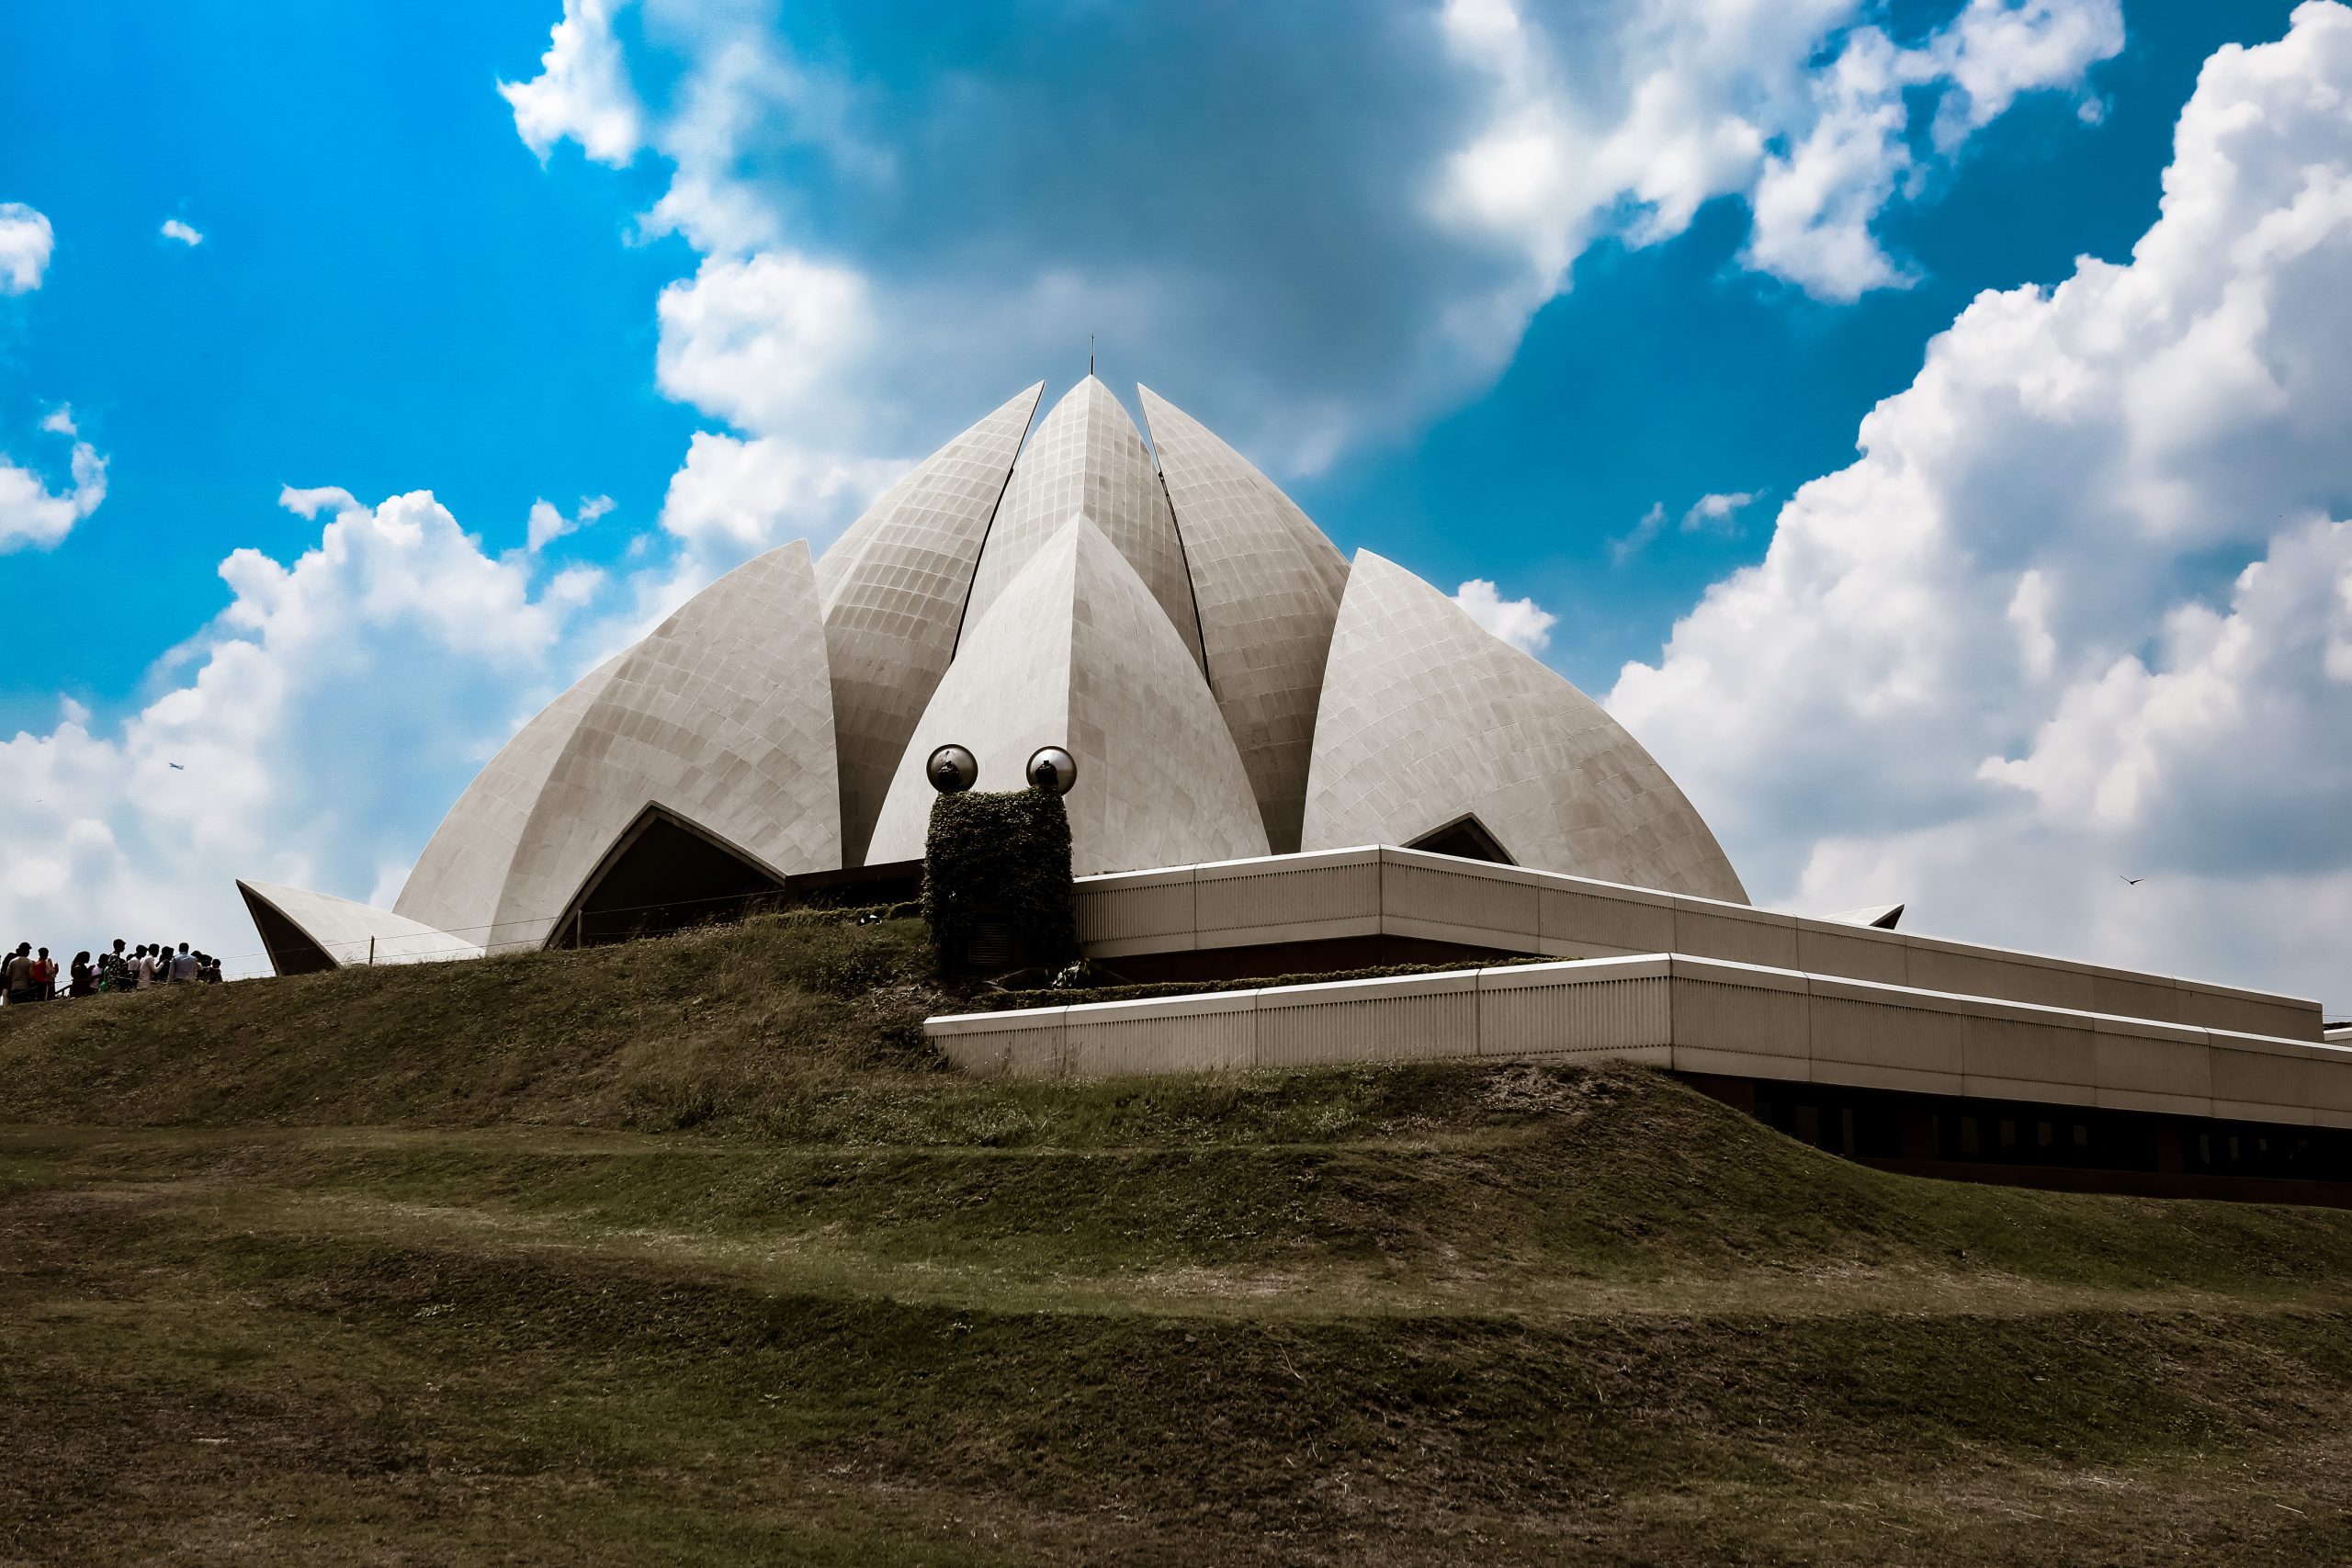 Lotus temple in Delhi - Free Image by MUHAMMED RAHIL P on 